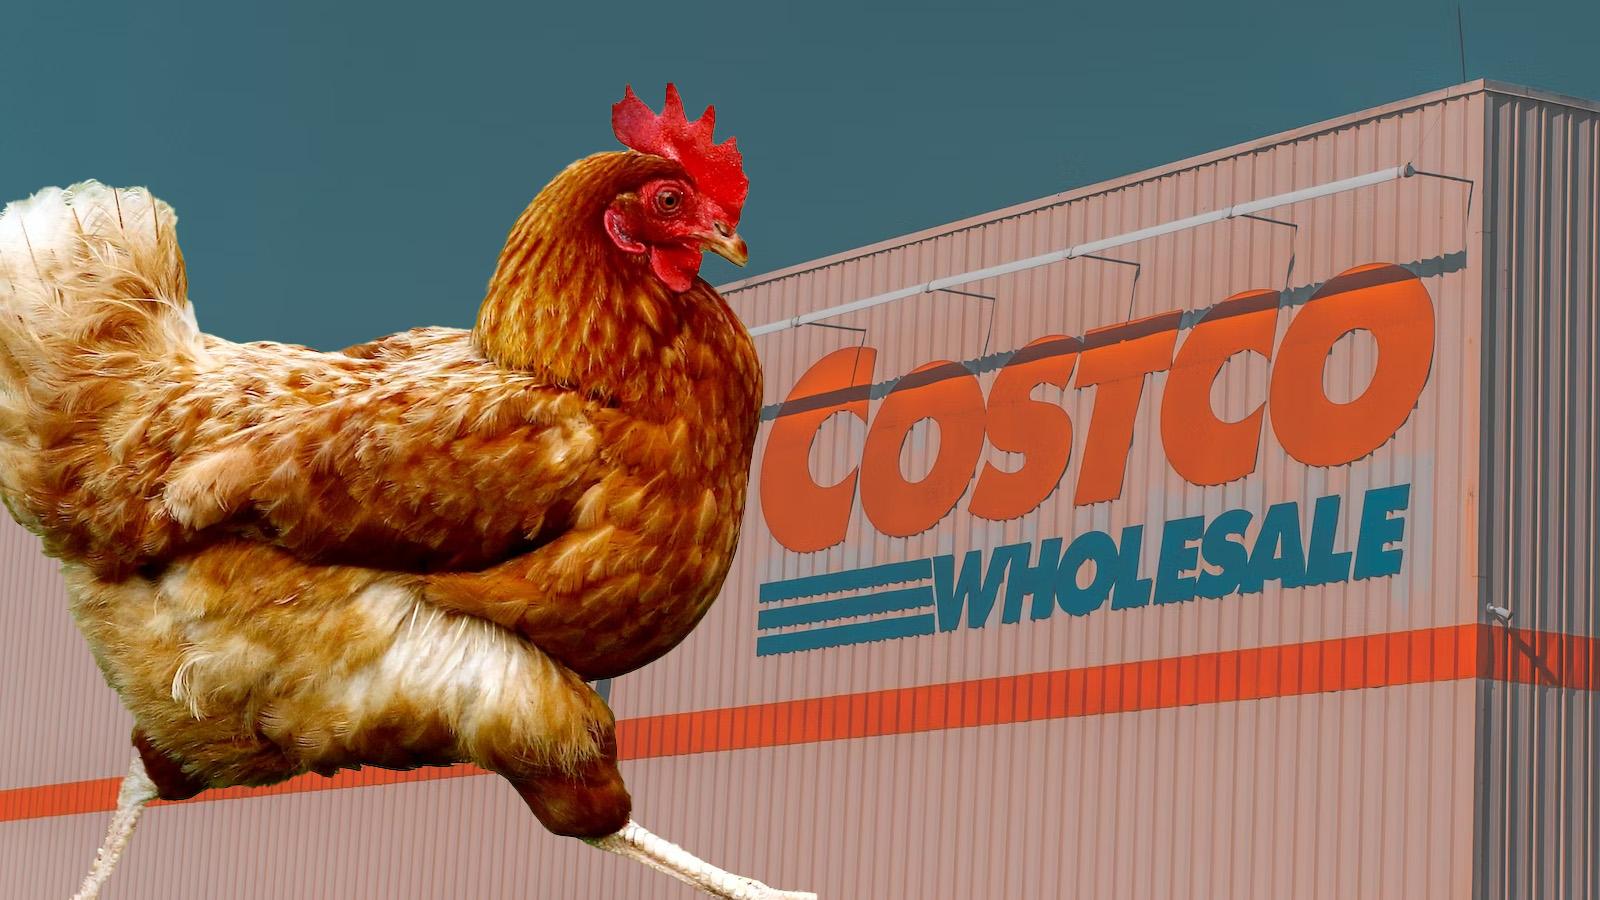 Costco “super-fans” discover rotisserie chicken secret after visiting 200 stores